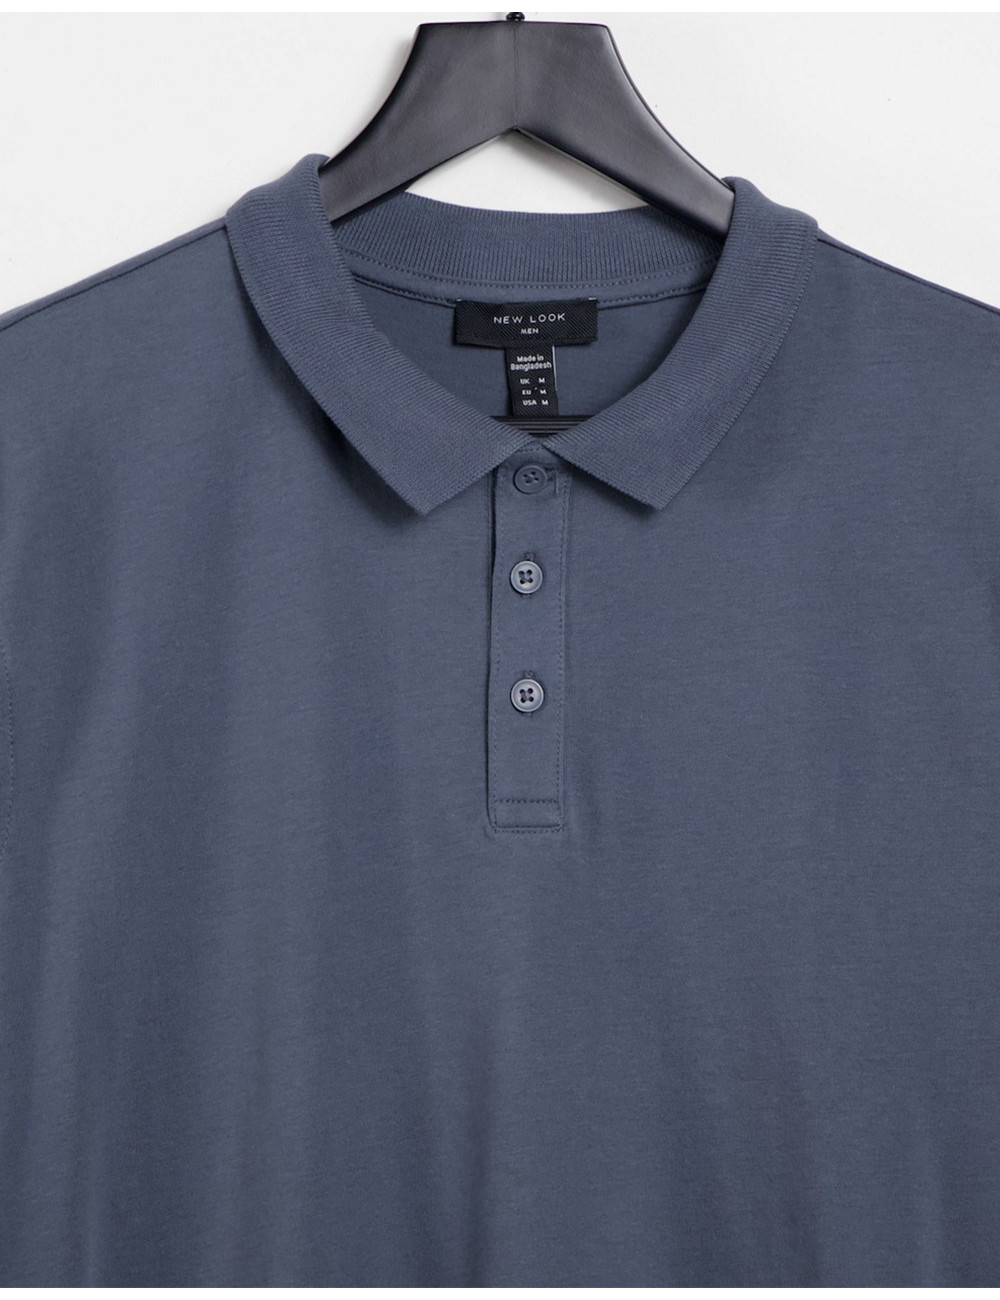 New Look jersey polo in blue